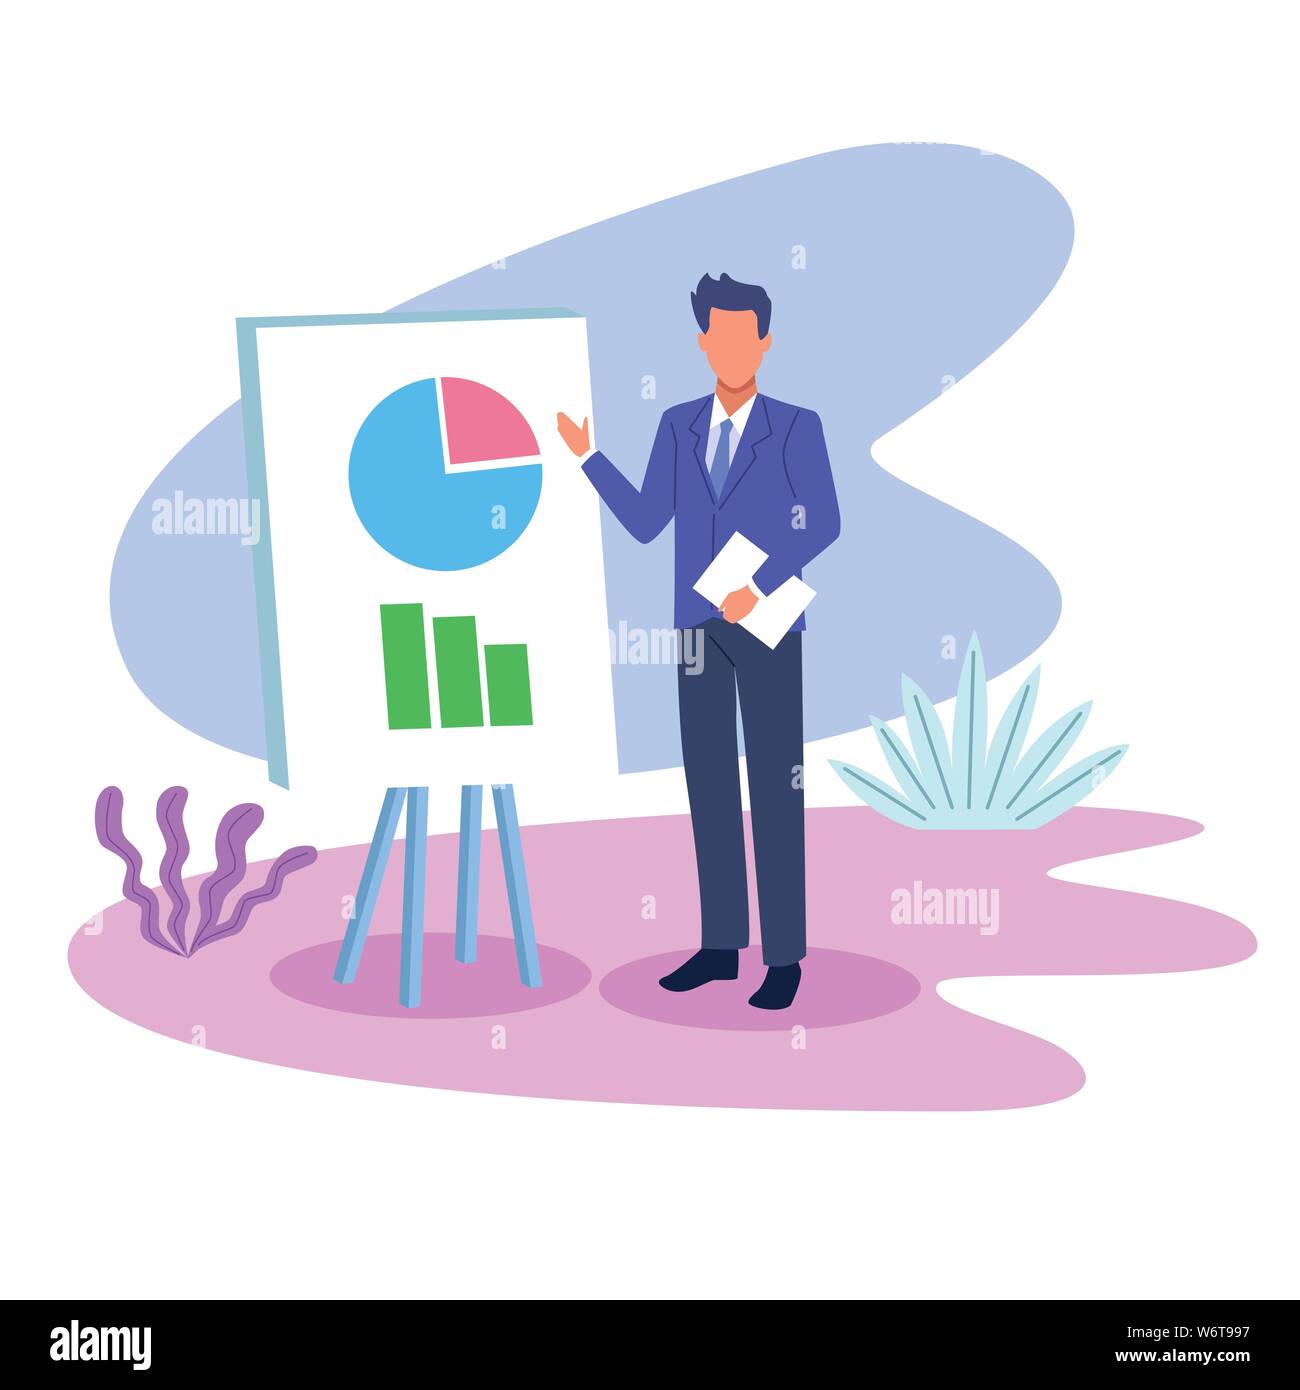 Business Professional Executive Work Cartoon Stock Vector Image Art Alamy ✓ free for commercial use ✓ high quality images. https www alamy com business professional executive work cartoon image262377619 html